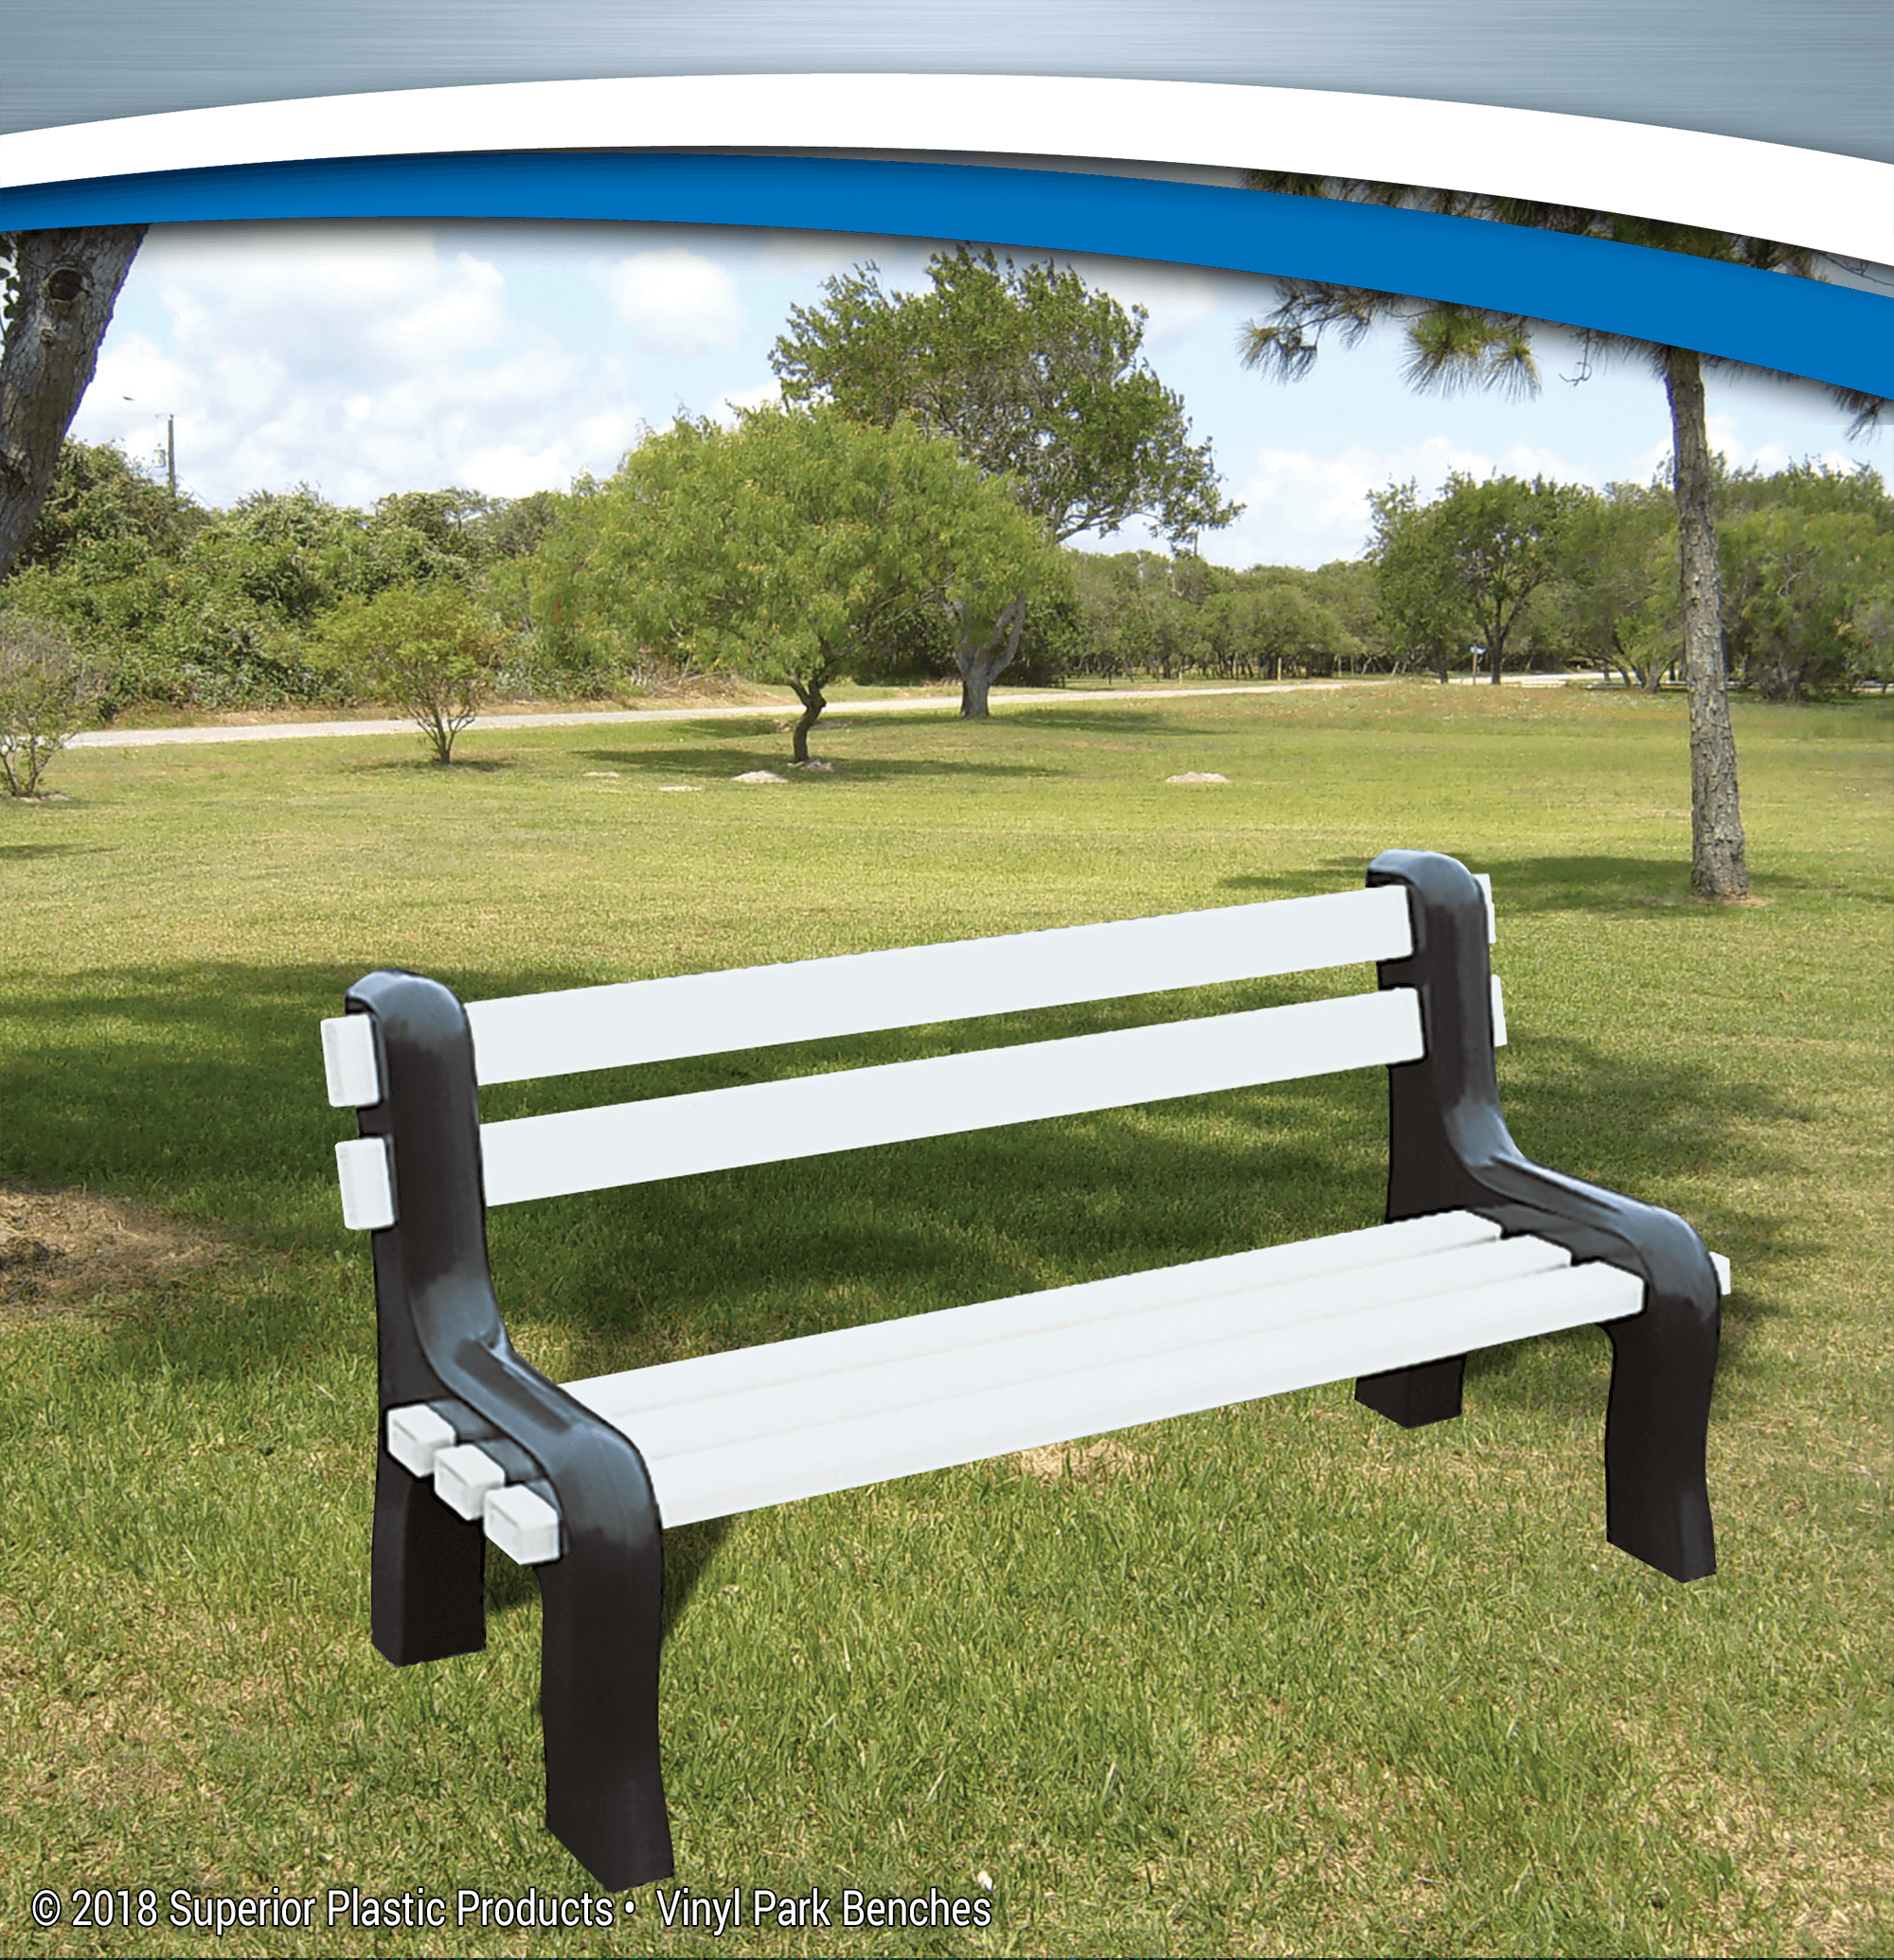 Durable & Affordable Vinyl Park Benches - Superior Plastic Products